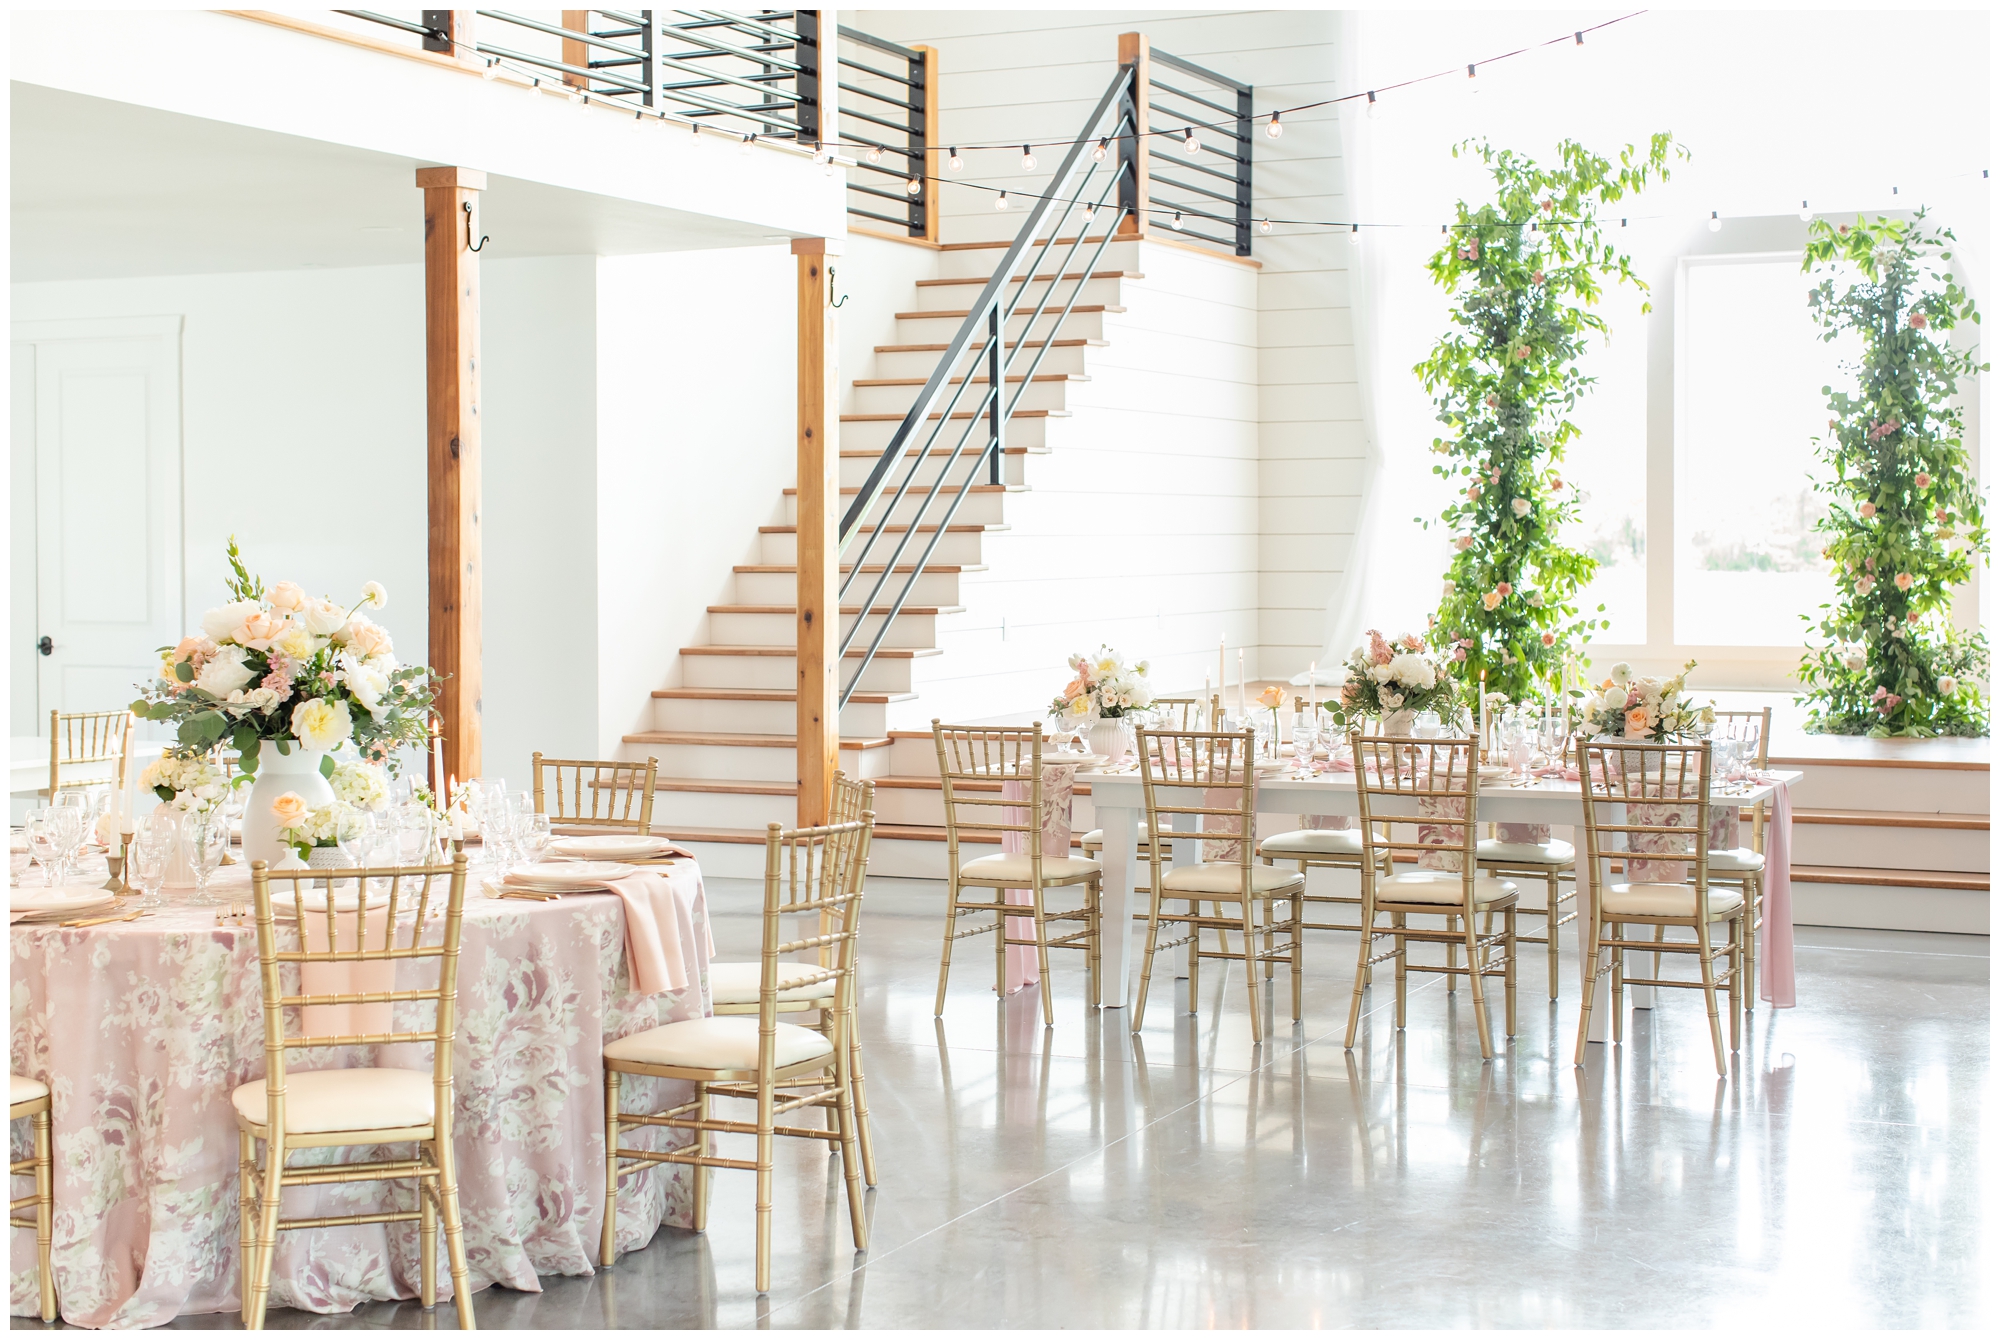 Styled wedding reception at Emerson Fields